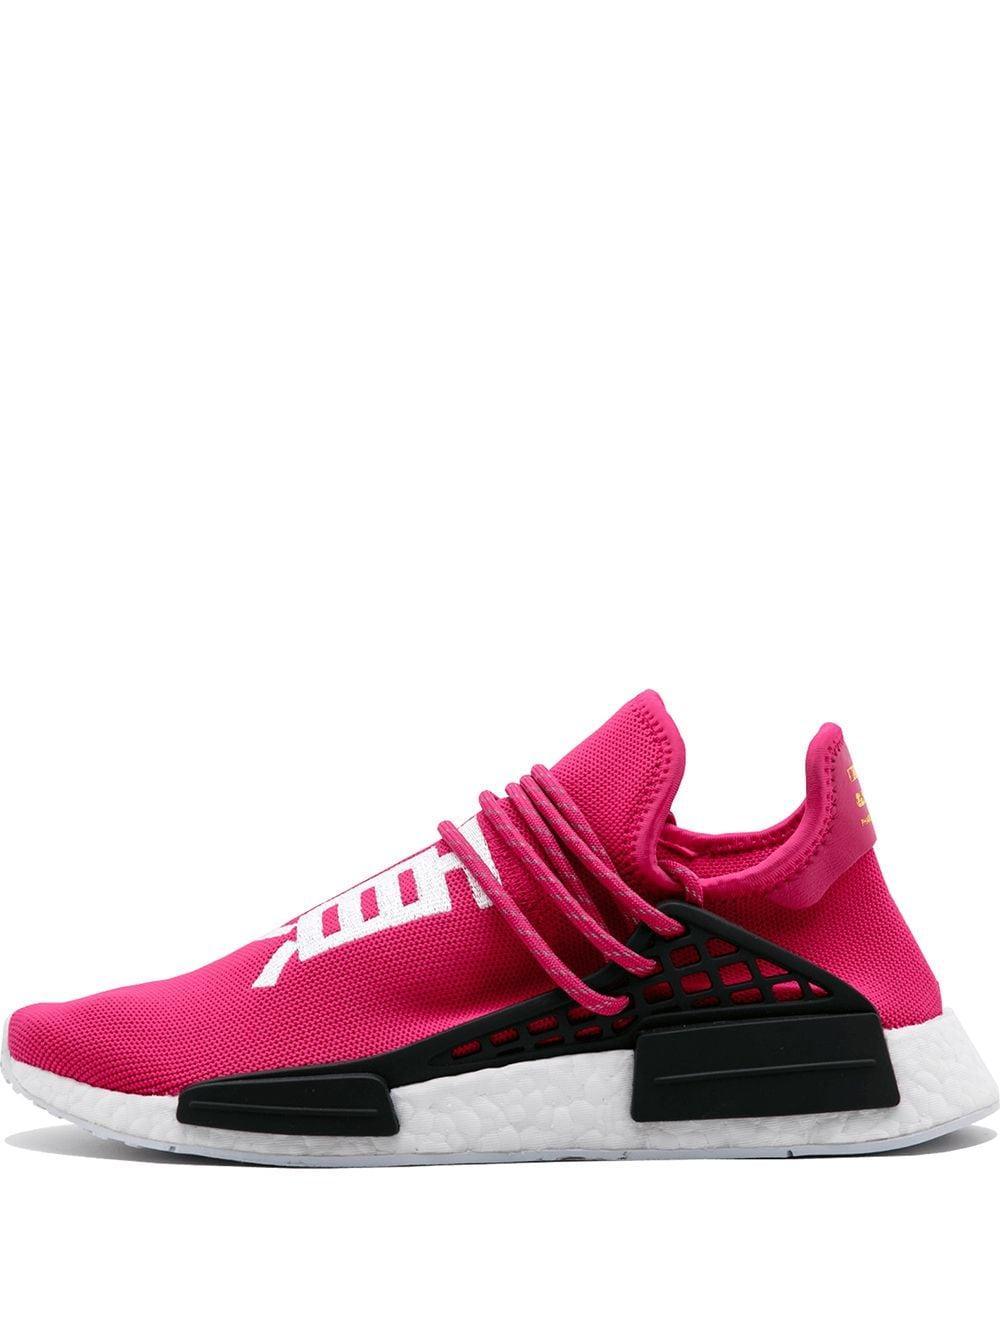 adidas Pharrell Williams Human Race Nmd Sneakers in Pink for Men | Lyst